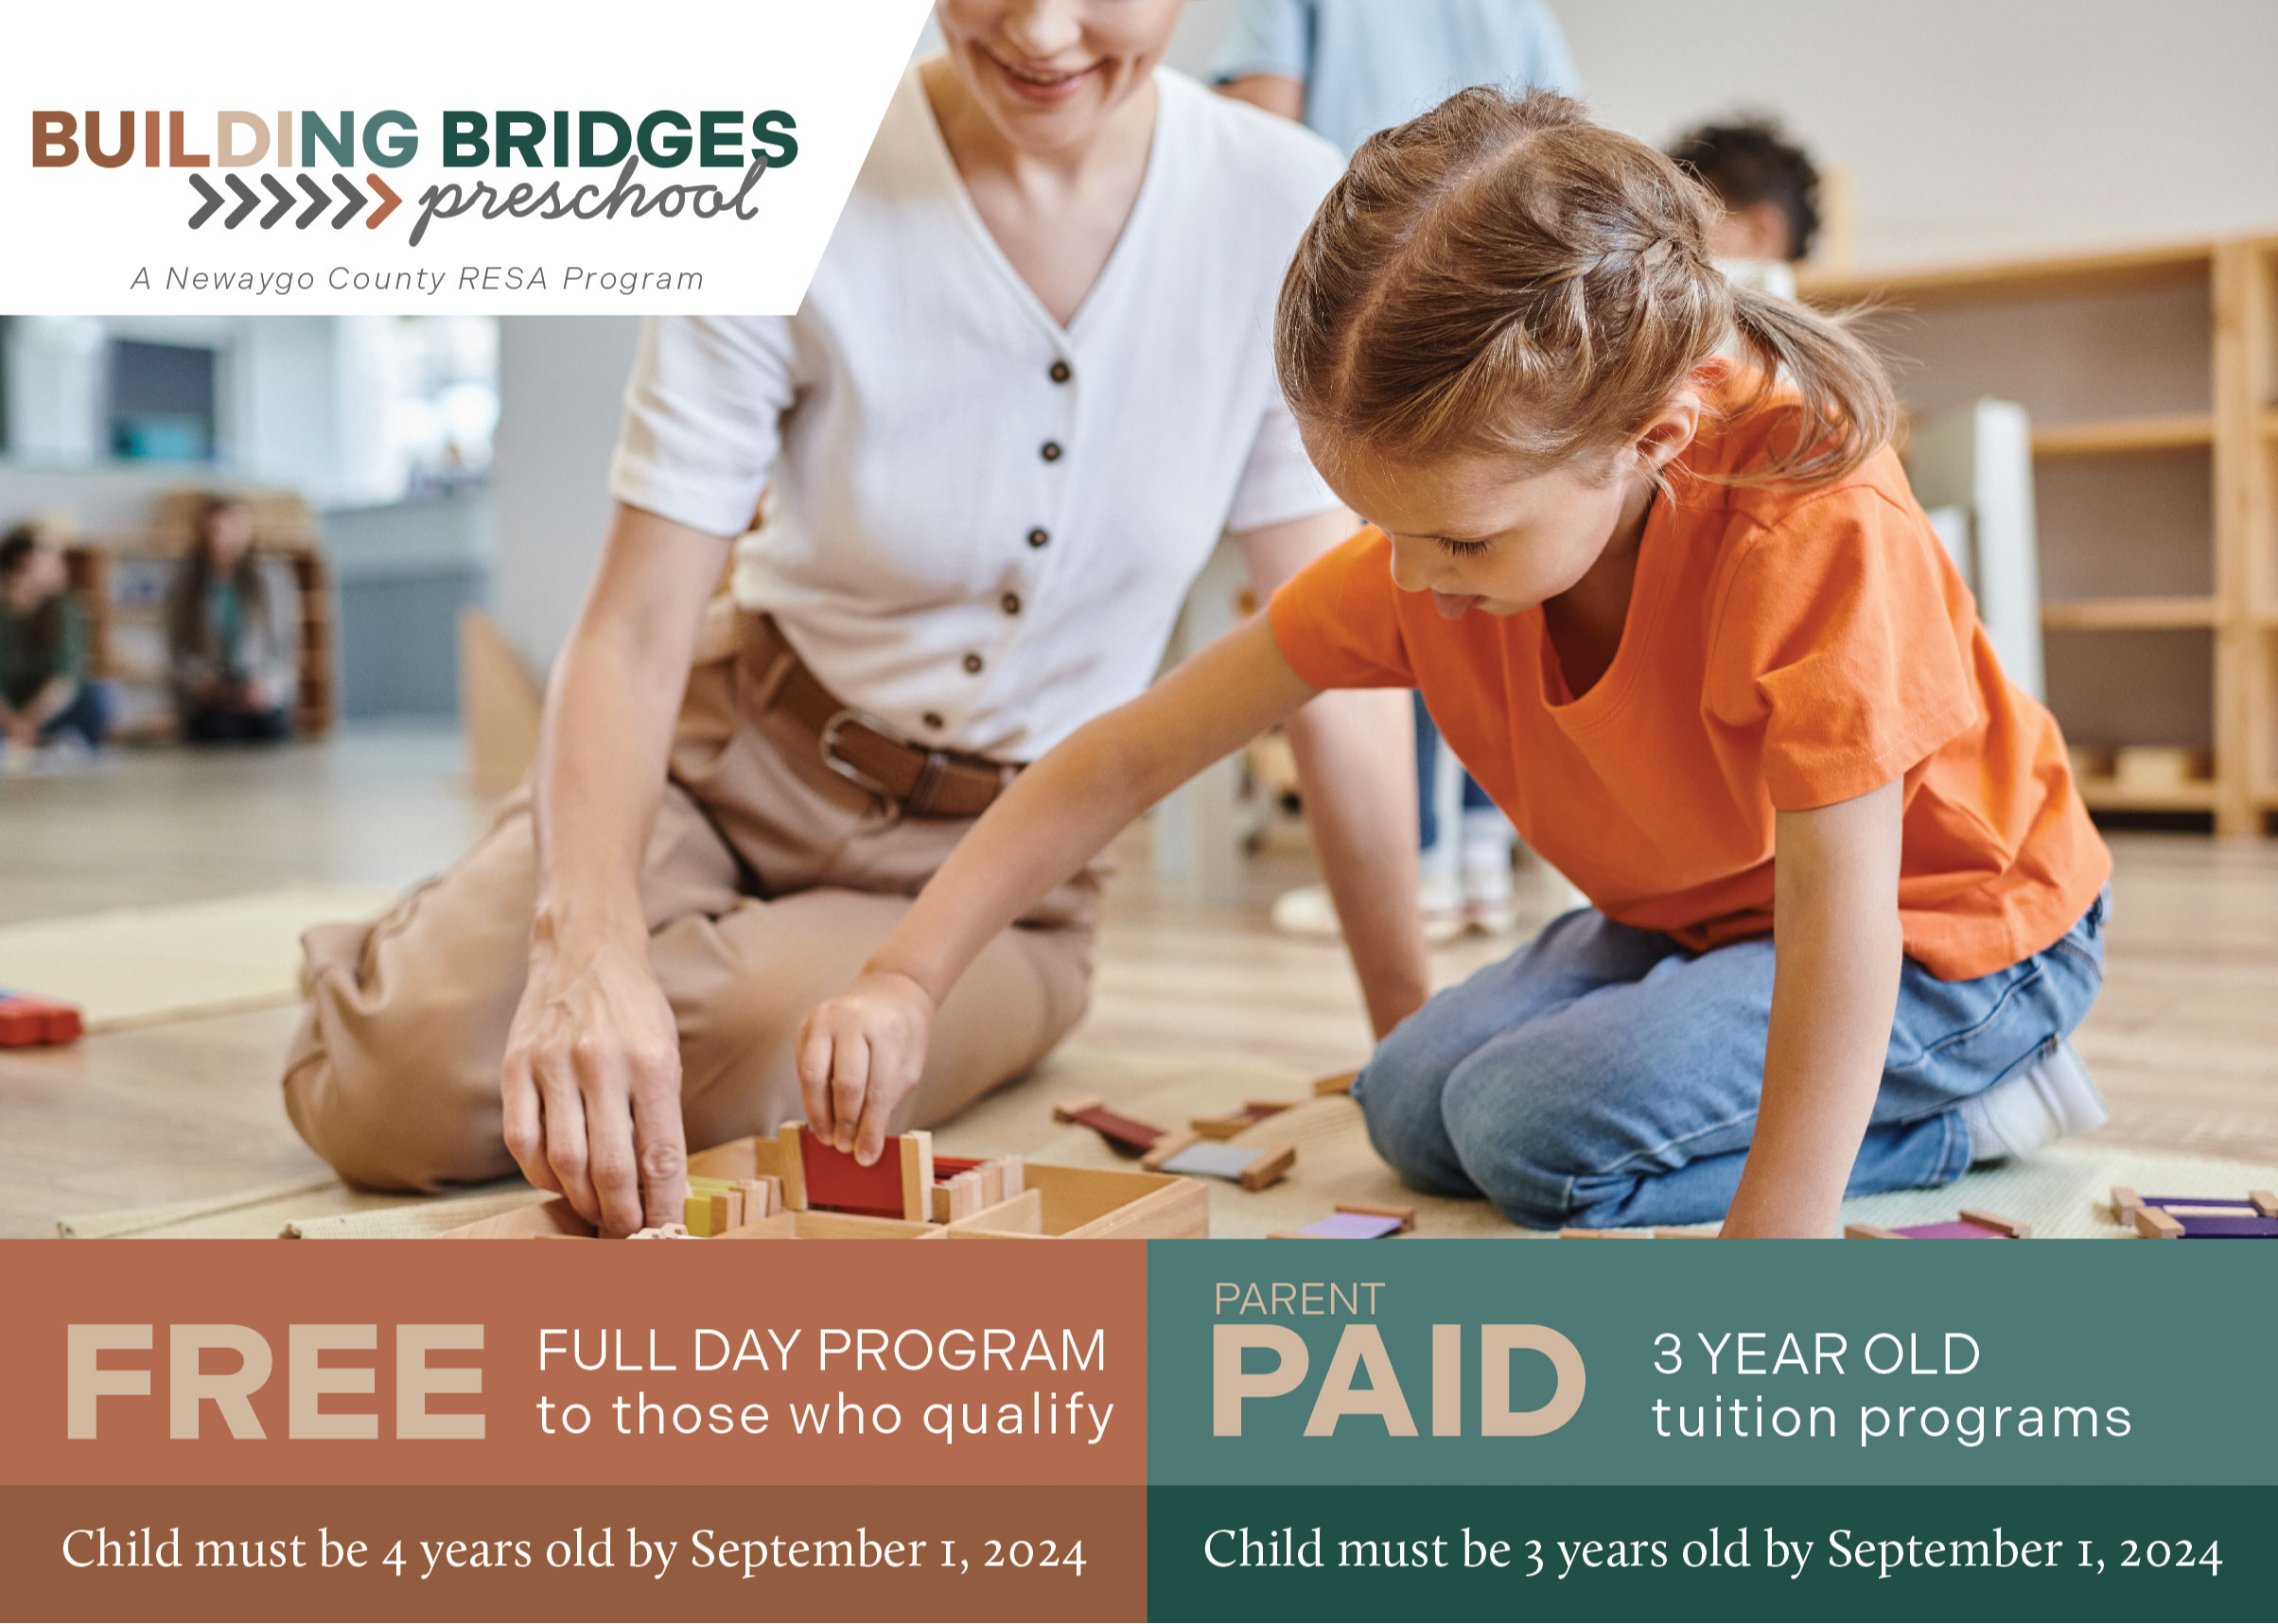 Building Bridges Preschool. Free full day program to those who qualify. Child must be 4 years old by September 1, 2024. Parent paid 3 year old tuition programs. Child must be 3 years old by September 1, 2024.